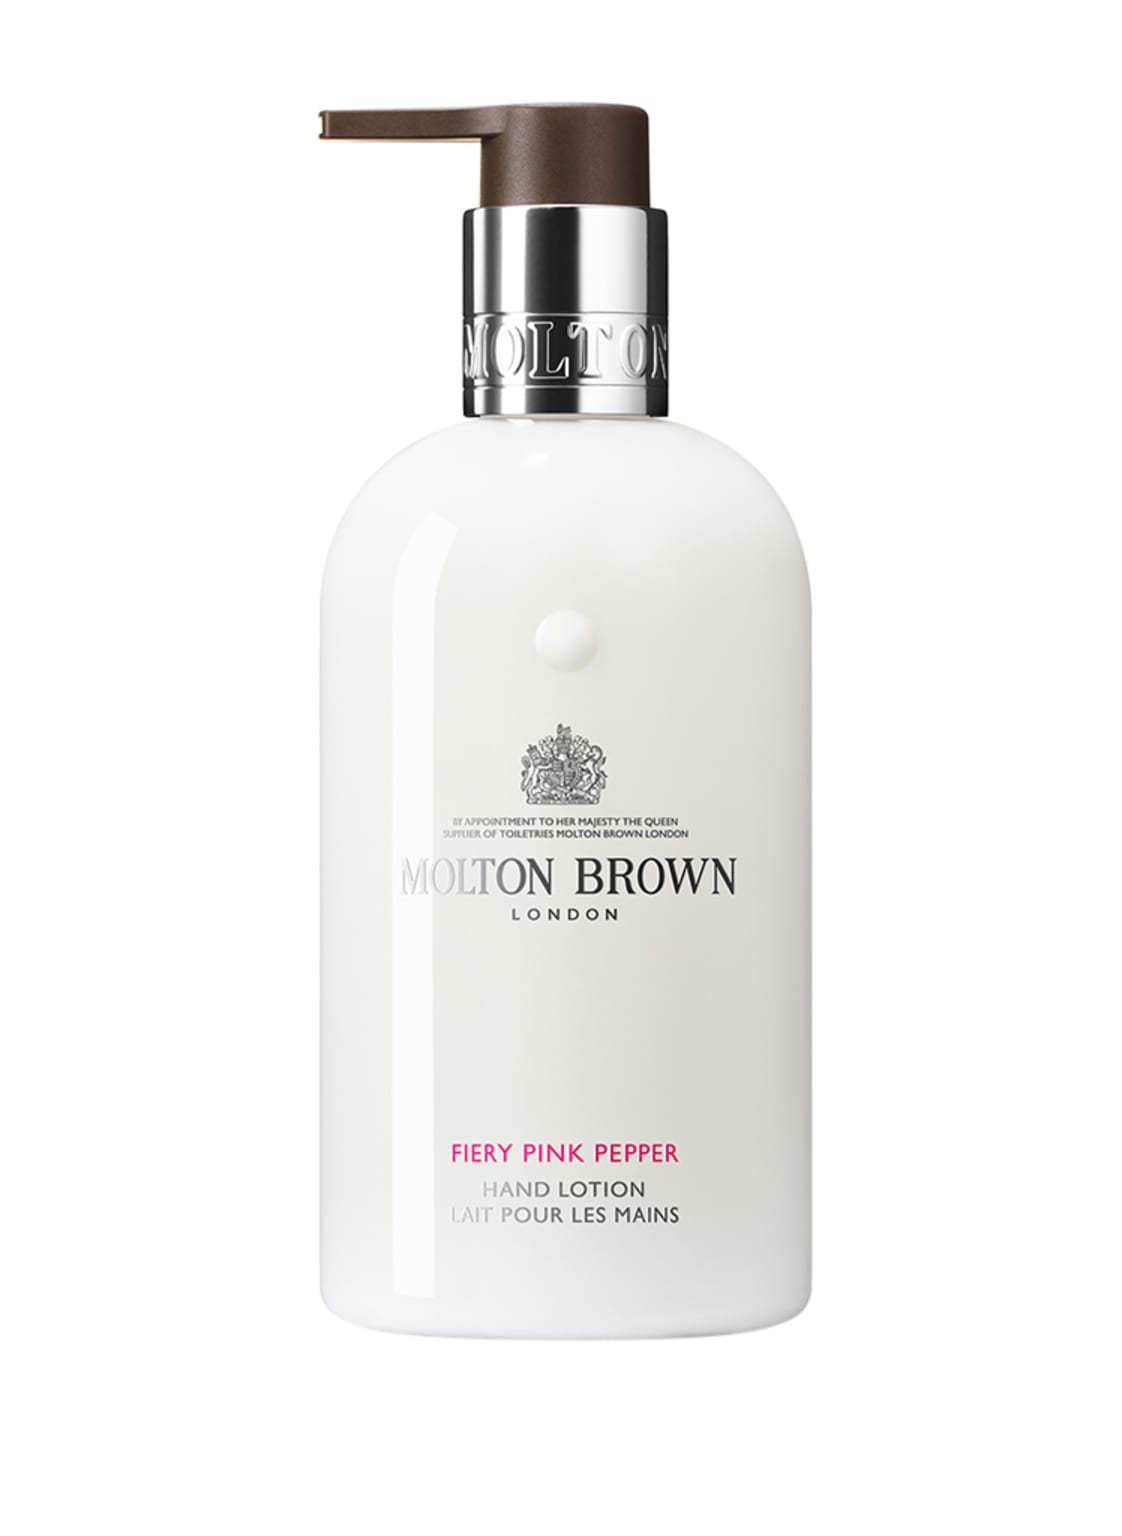 Molton Brown Fiery Pink Pepper Hand Lotion 300 ml von MOLTON BROWN